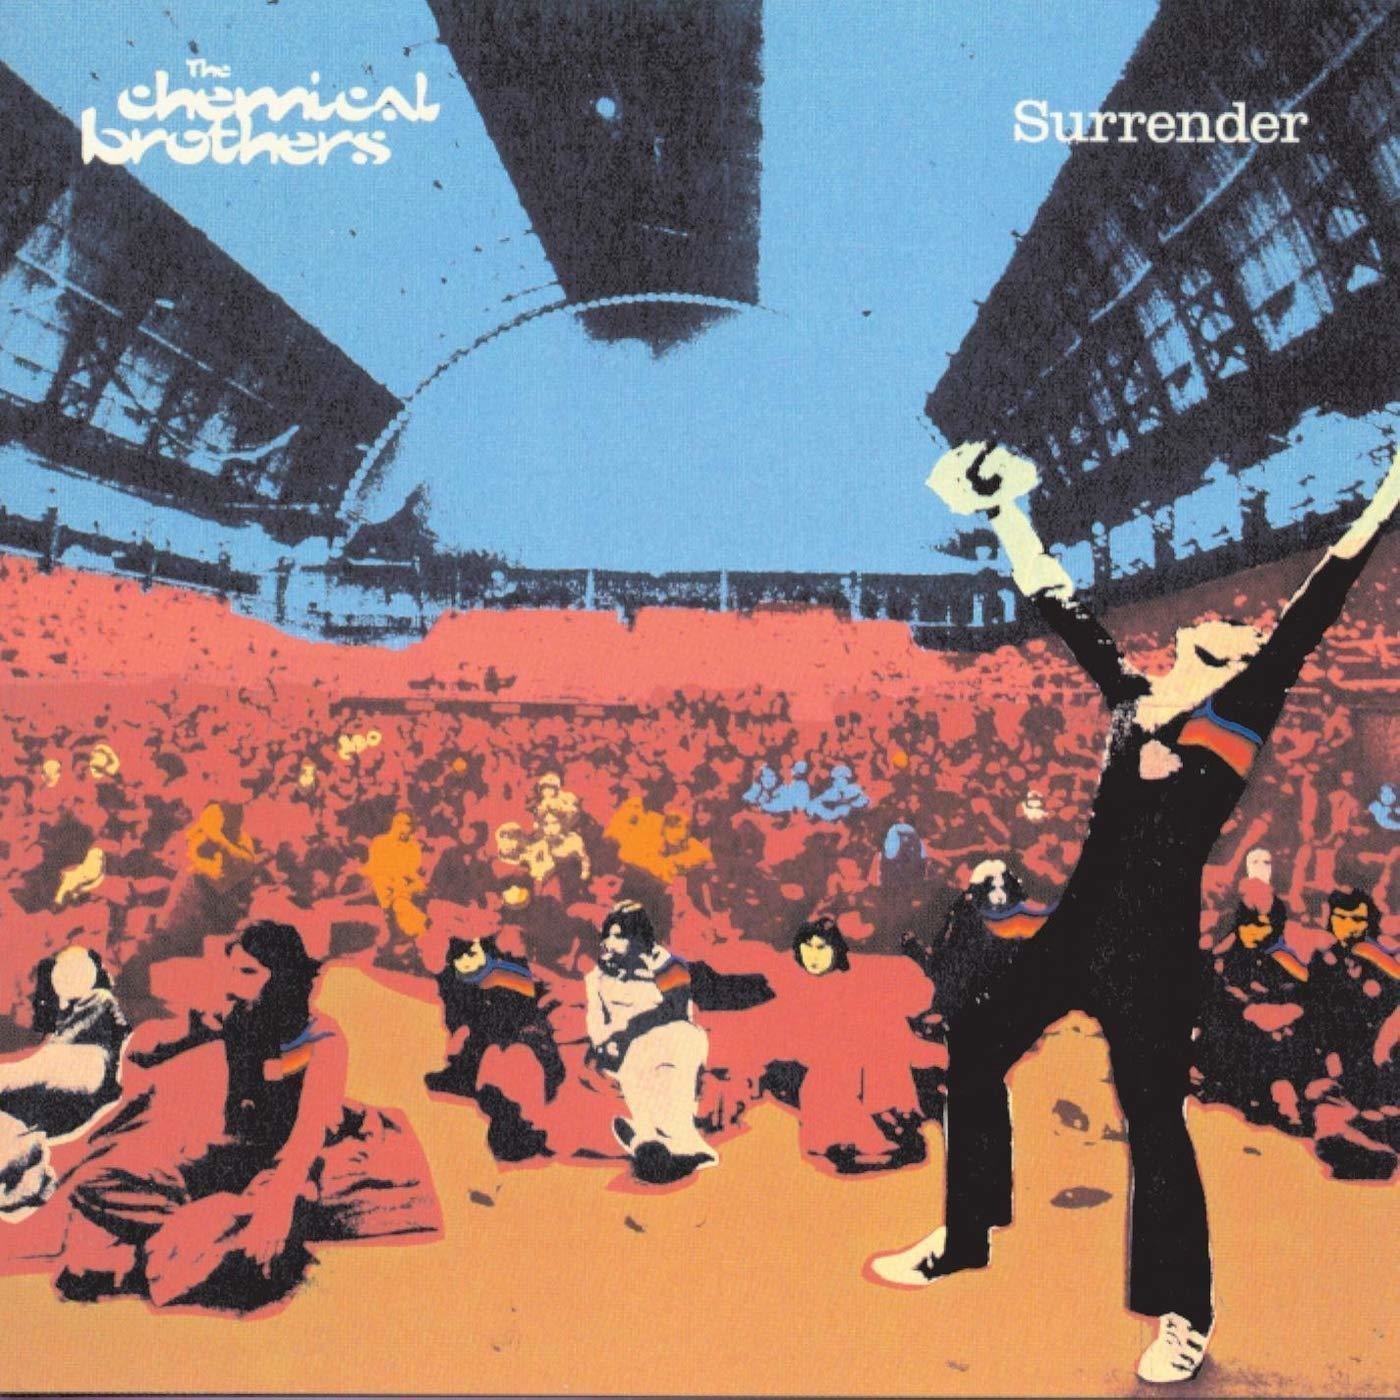 Vinyl Record The Chemical Brothers - Surrender (4 LP + DVD)